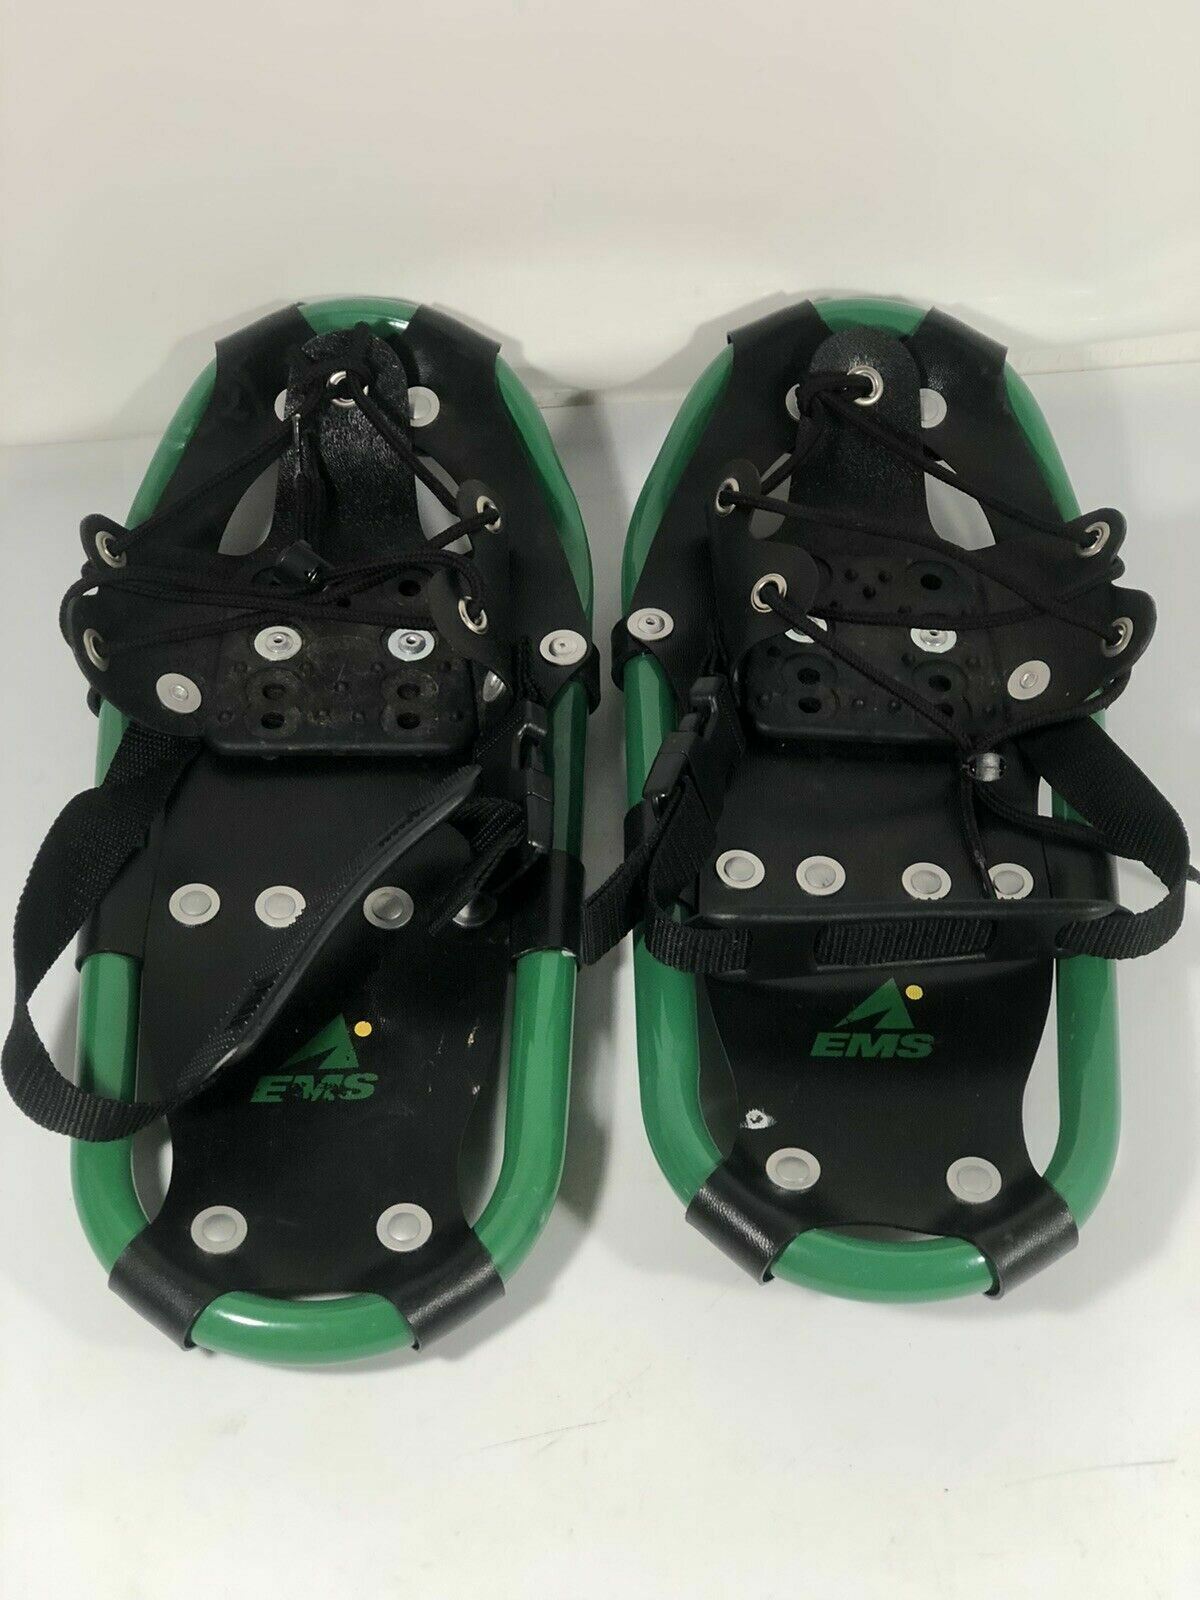 To increase Yup remaining EMS Green 16 INCH Vintage Snow Shoes | eBay